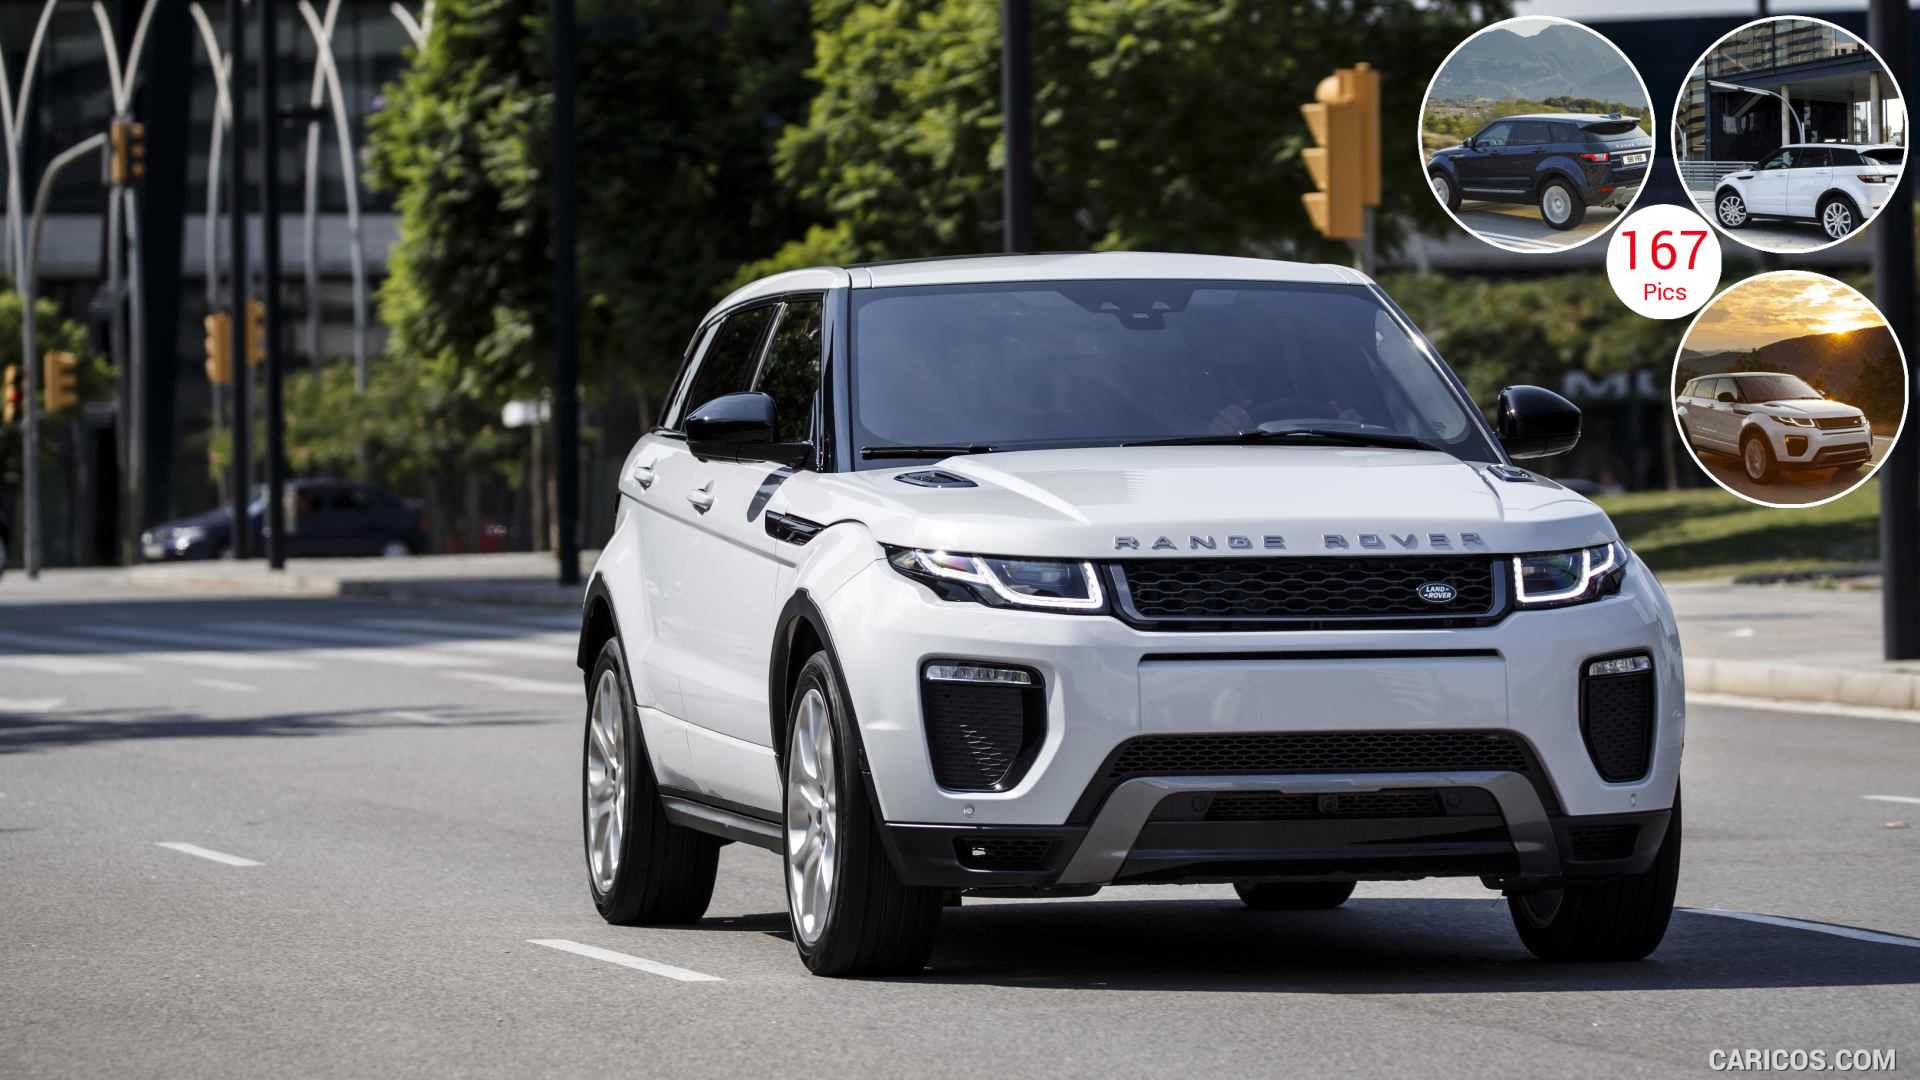 Range Rover Evoque TD4 4WD in Yulong White. HD